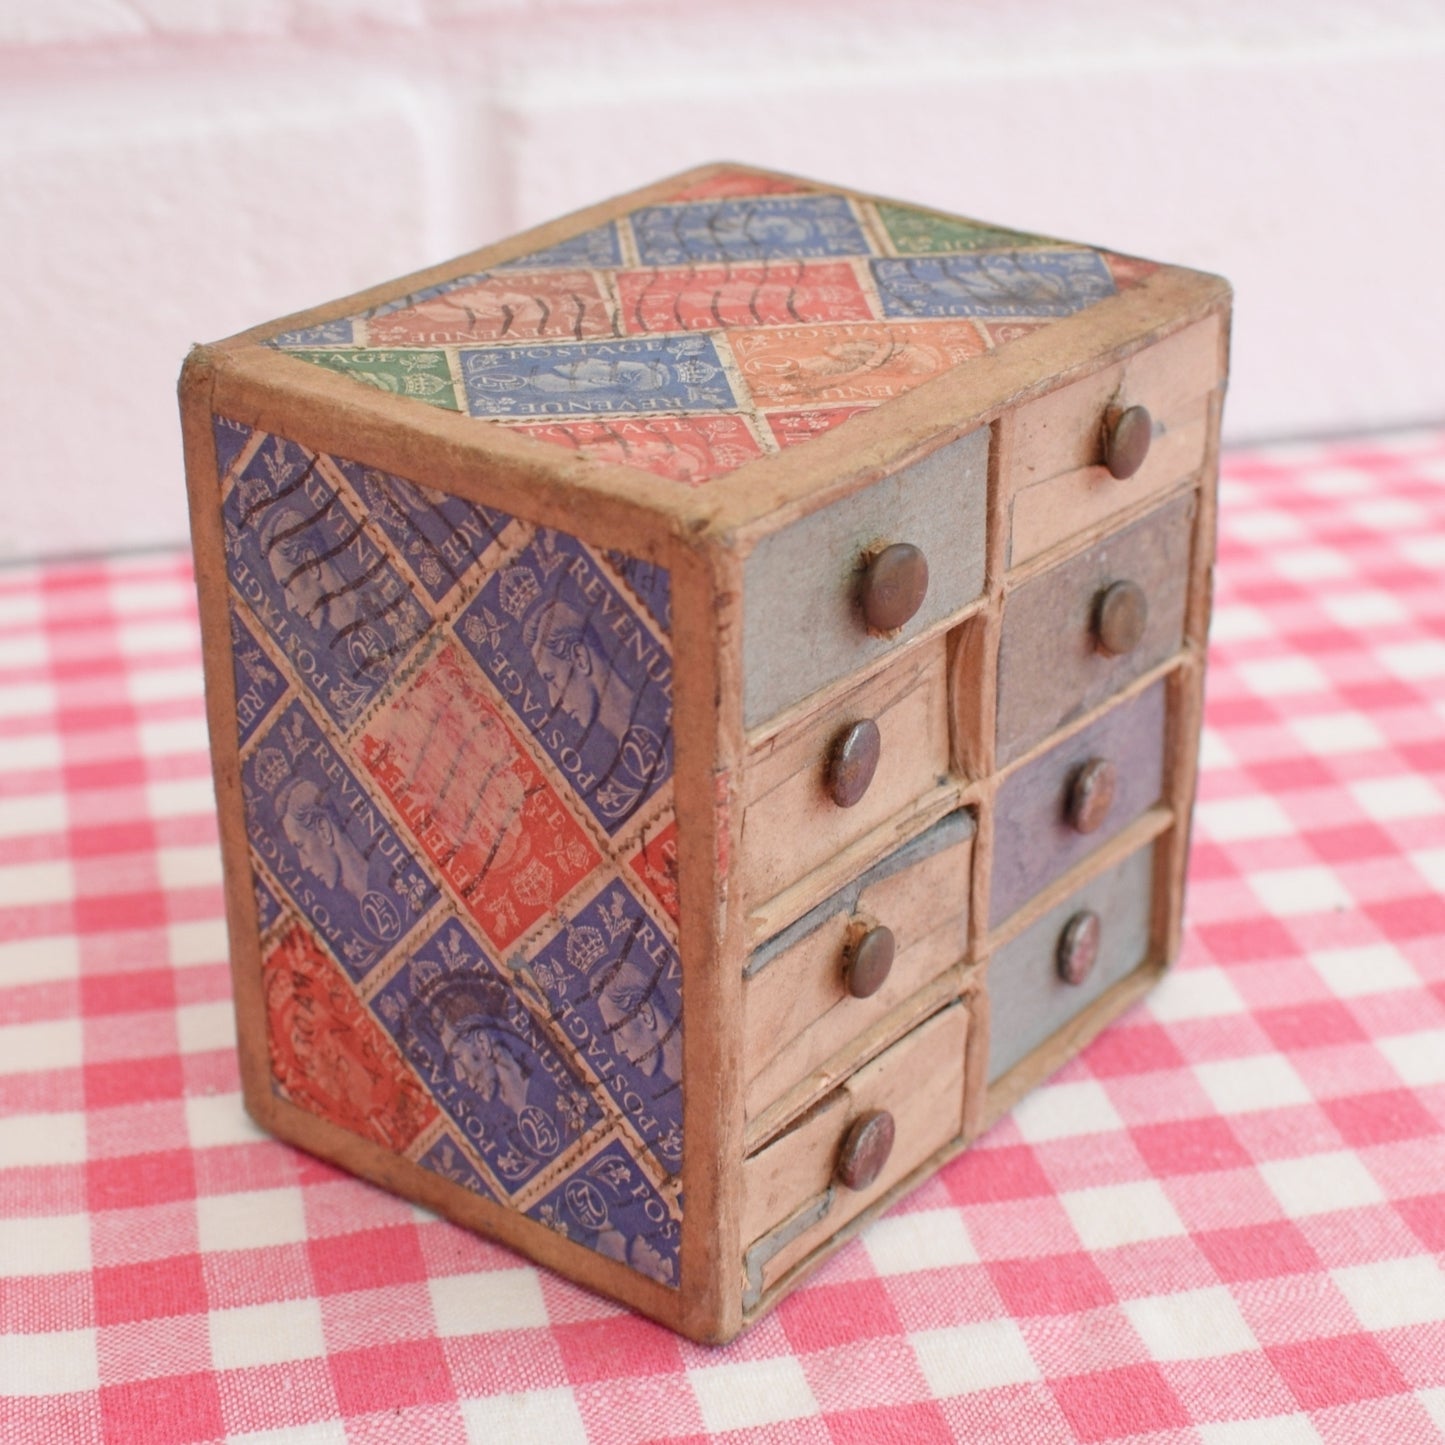 Vintage 1940s Homemade Mini Drawers - Stamps